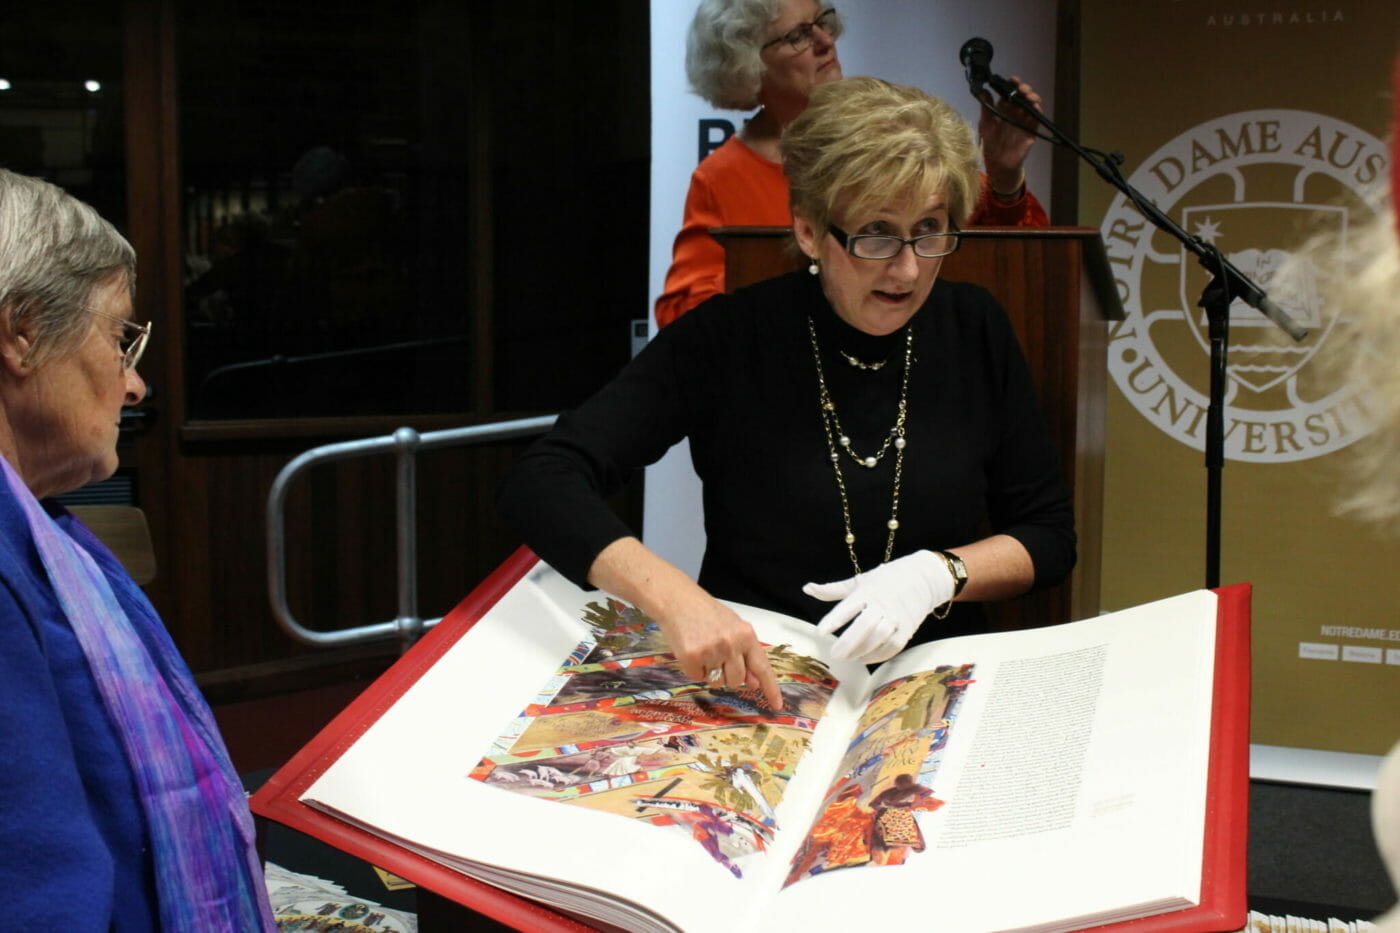 A docent from the University of Notre Dame Australia displays the Heritage Edition at the university's Festival of Religious Art.